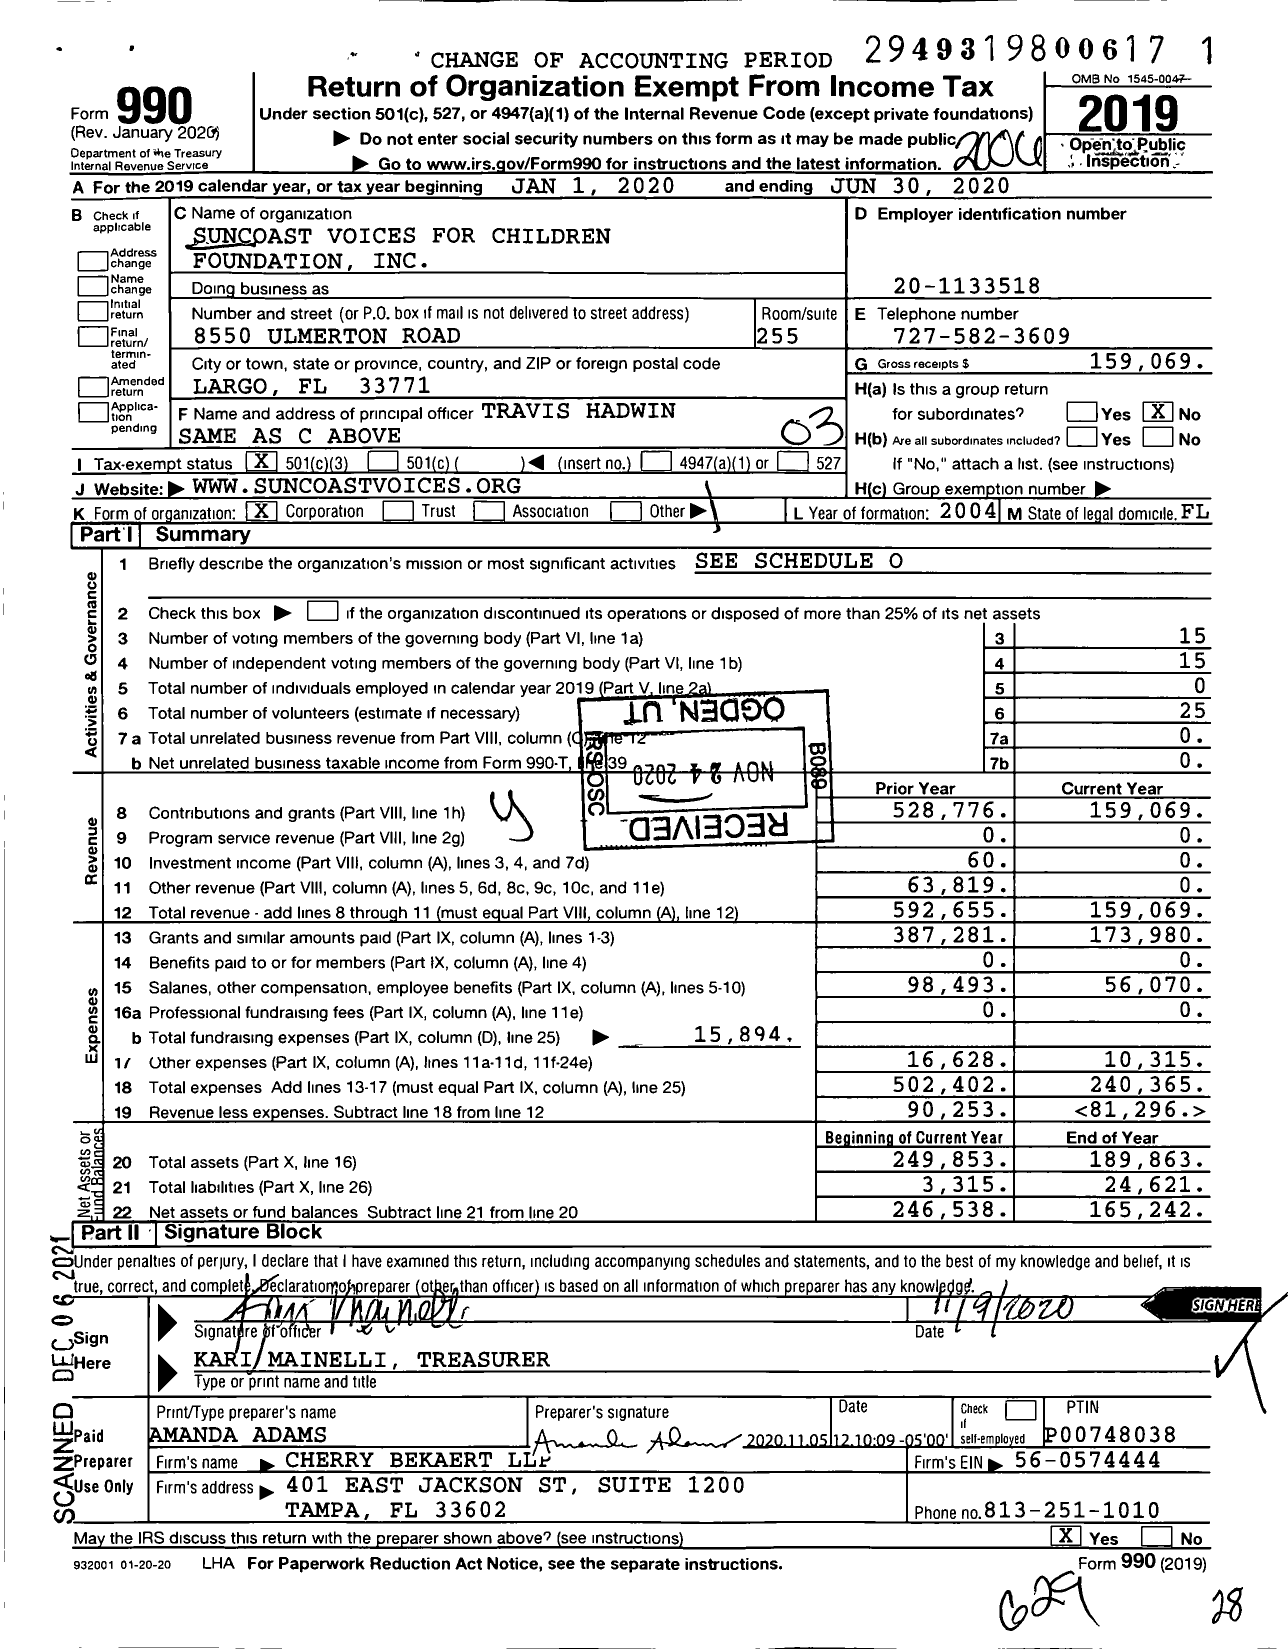 Image of first page of 2019 Form 990 for Suncoast Voices for Children Foundation